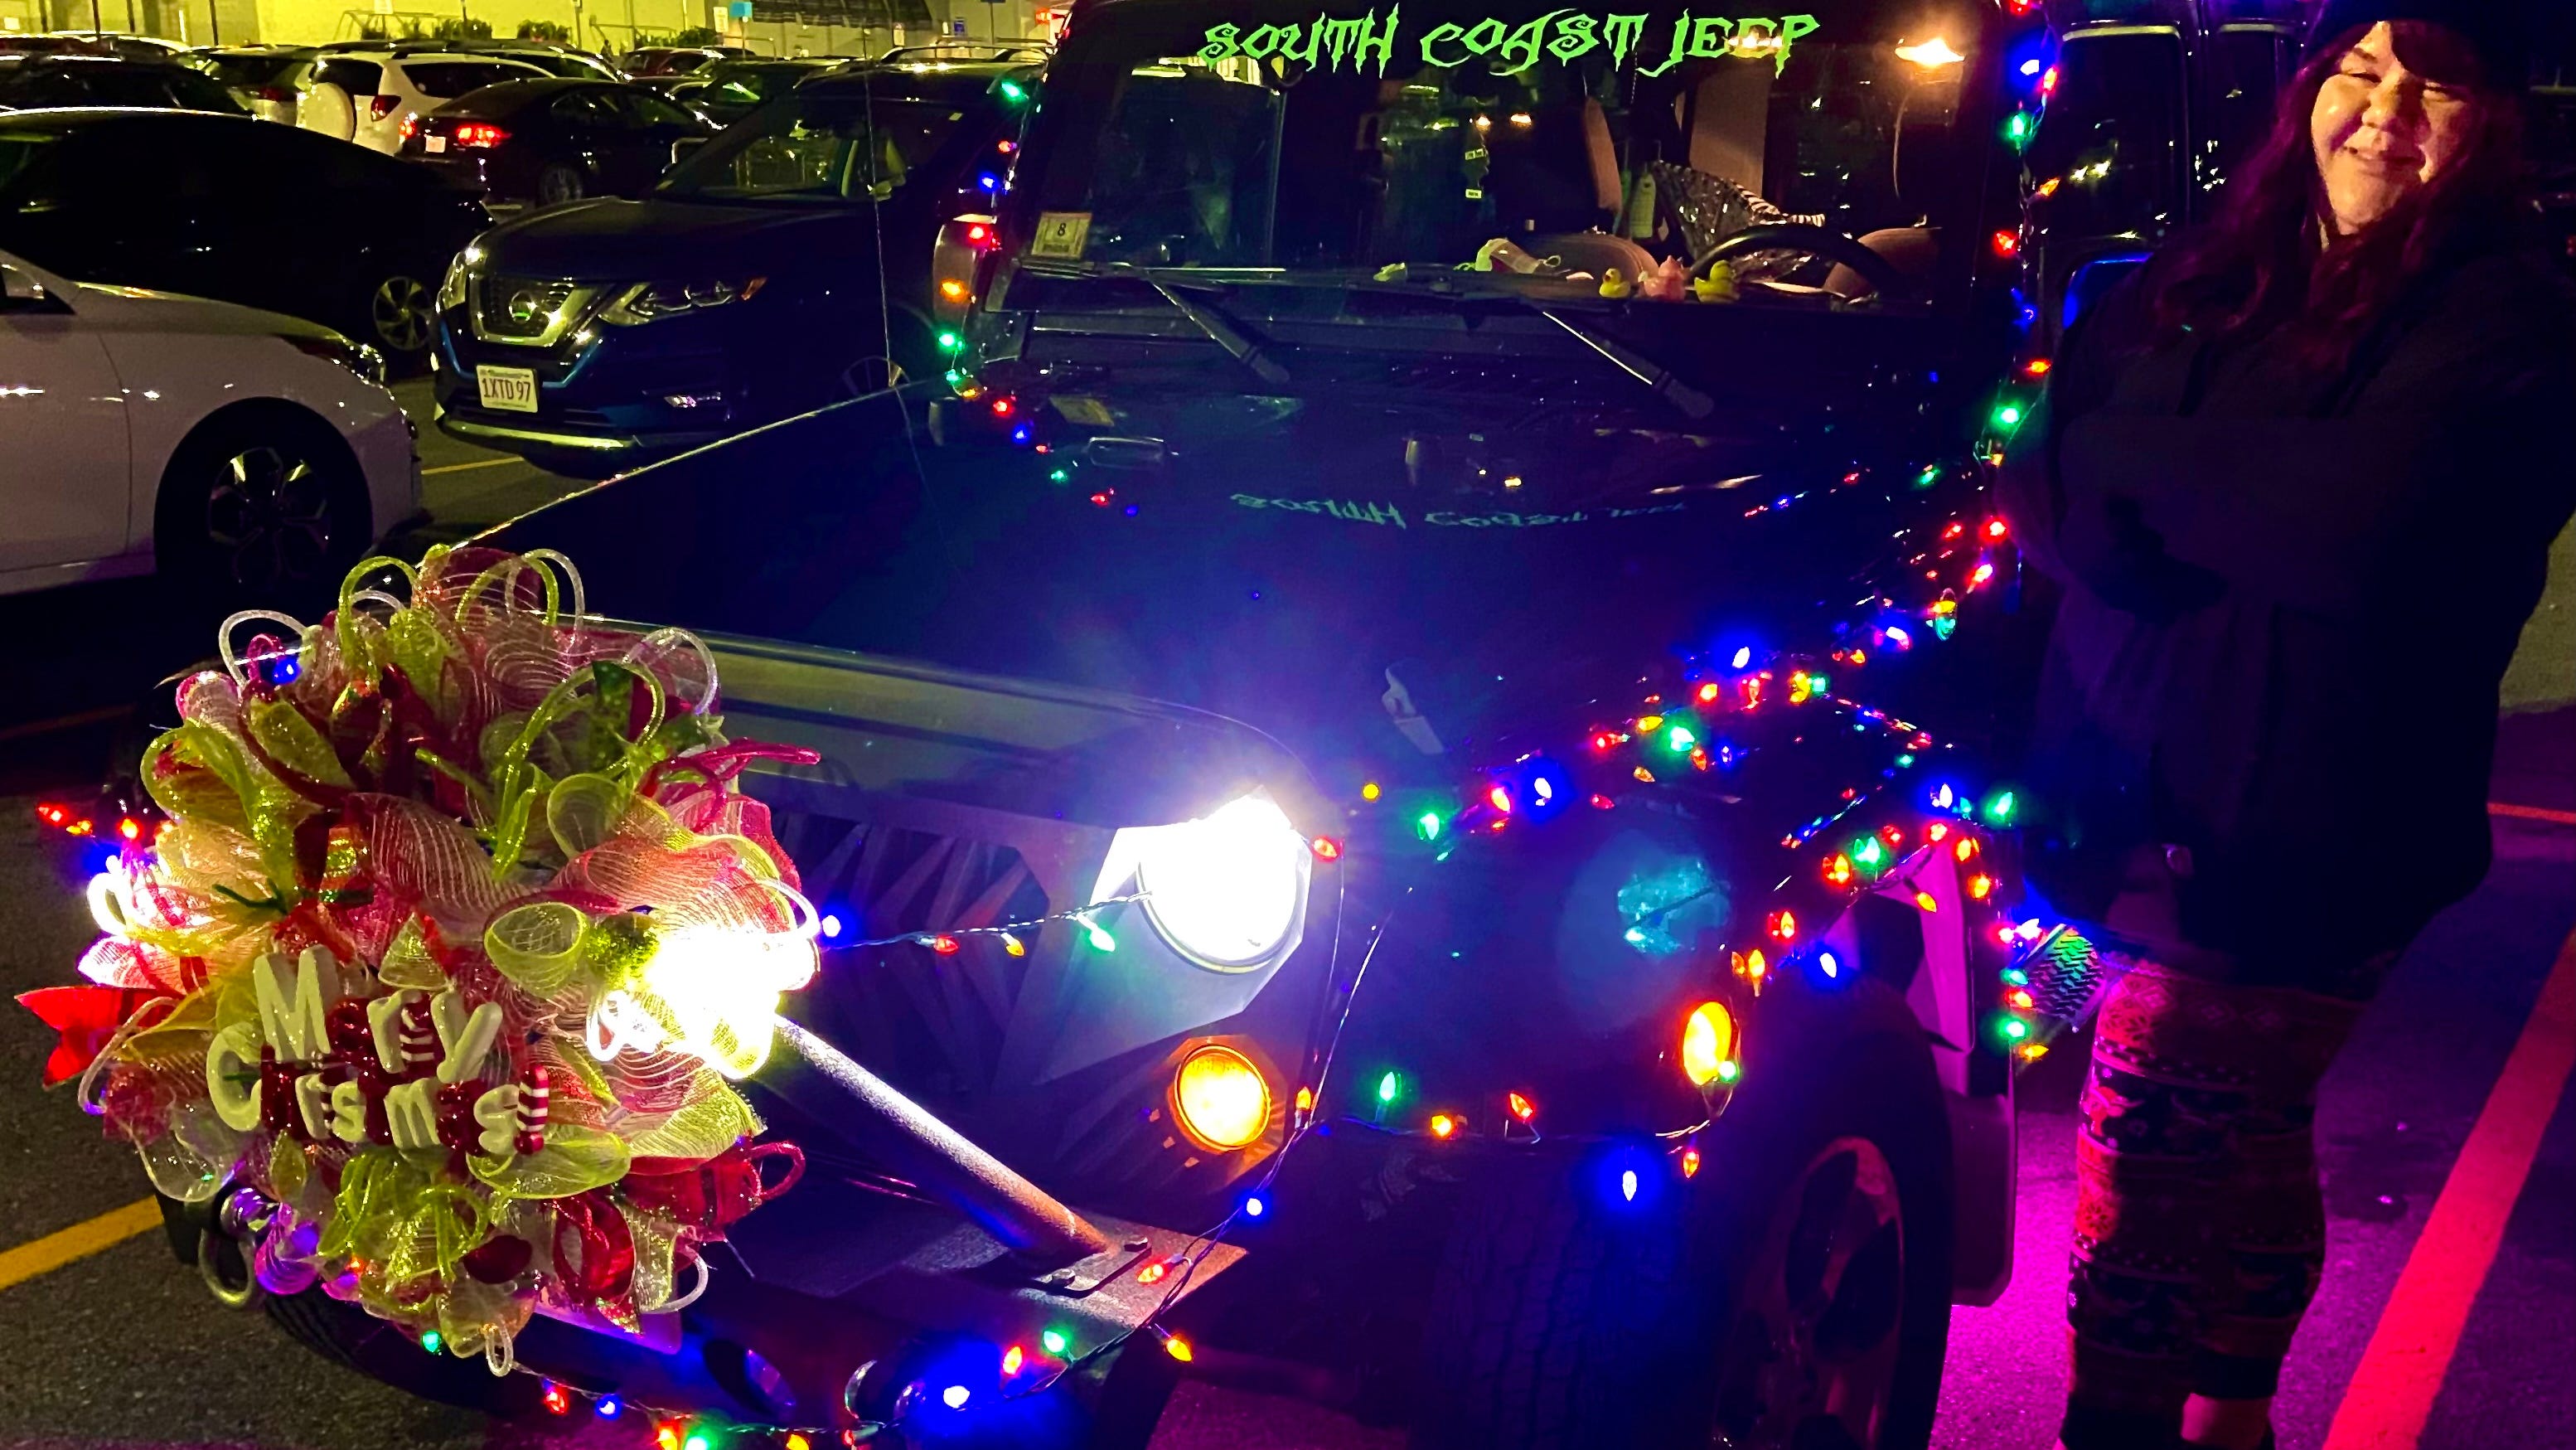 Fall River Jeep Wrangler decorated with wreaths, 500 Christmas lights